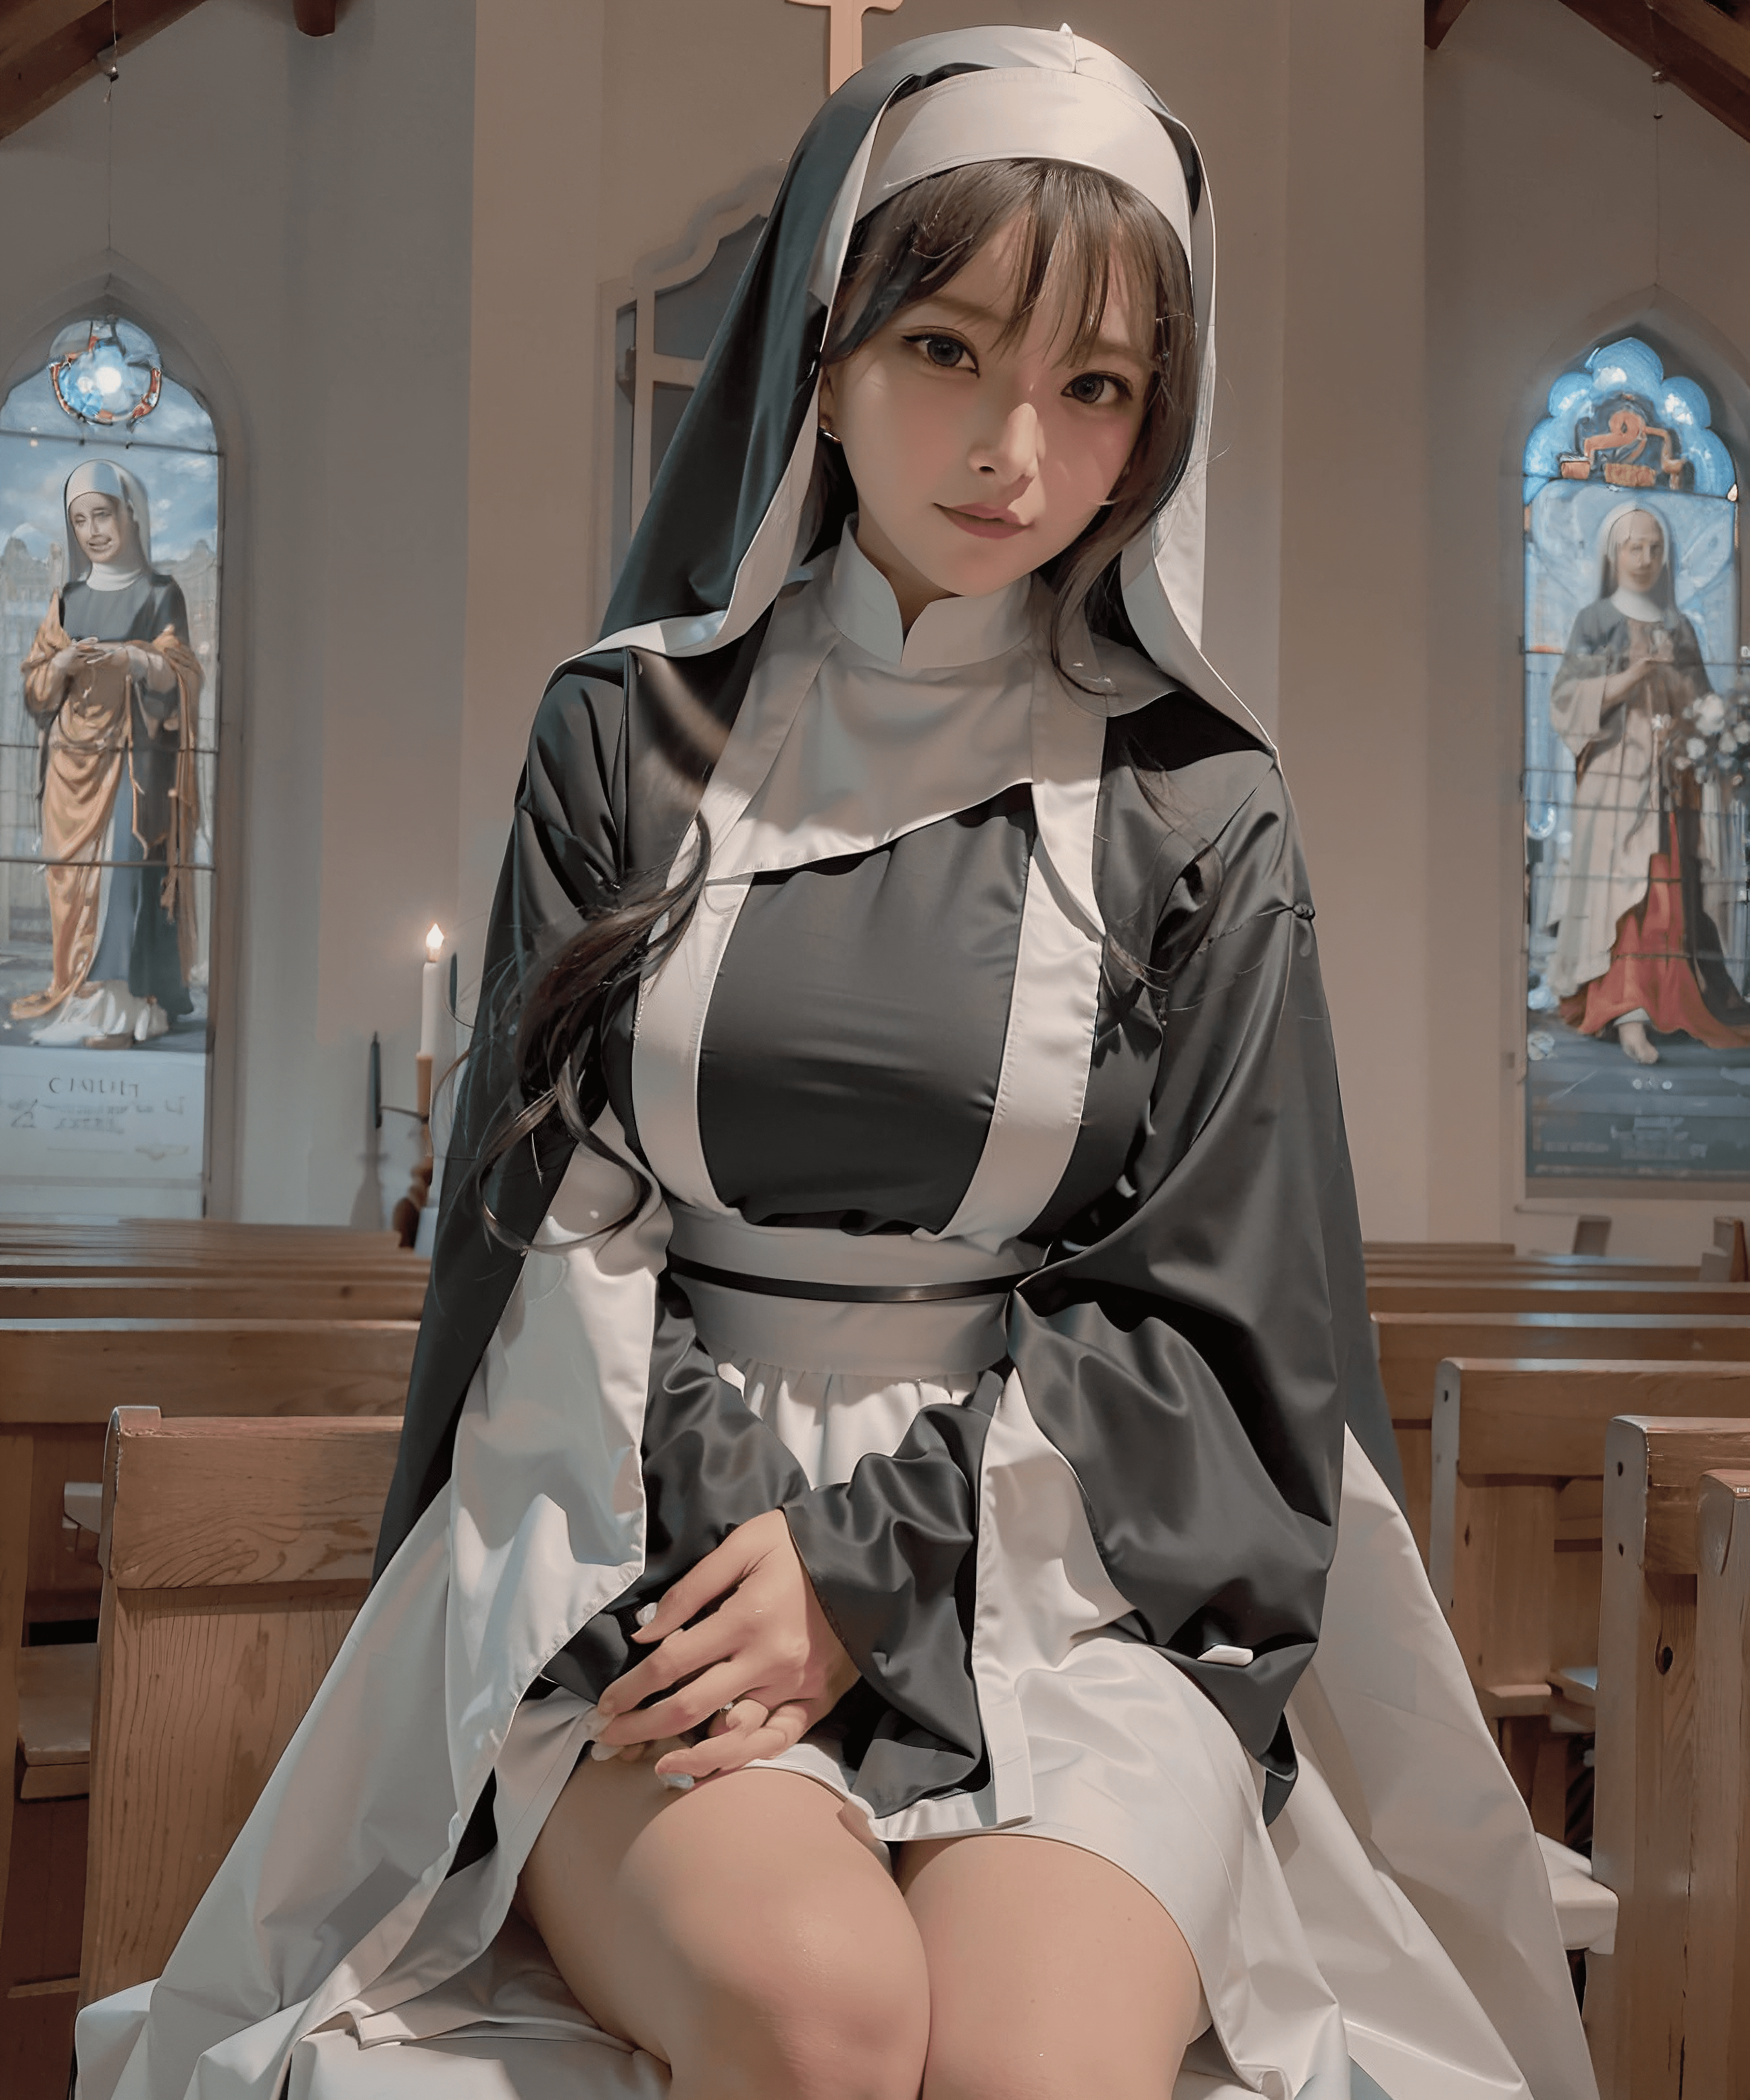 There's someone who needs an AI nun.